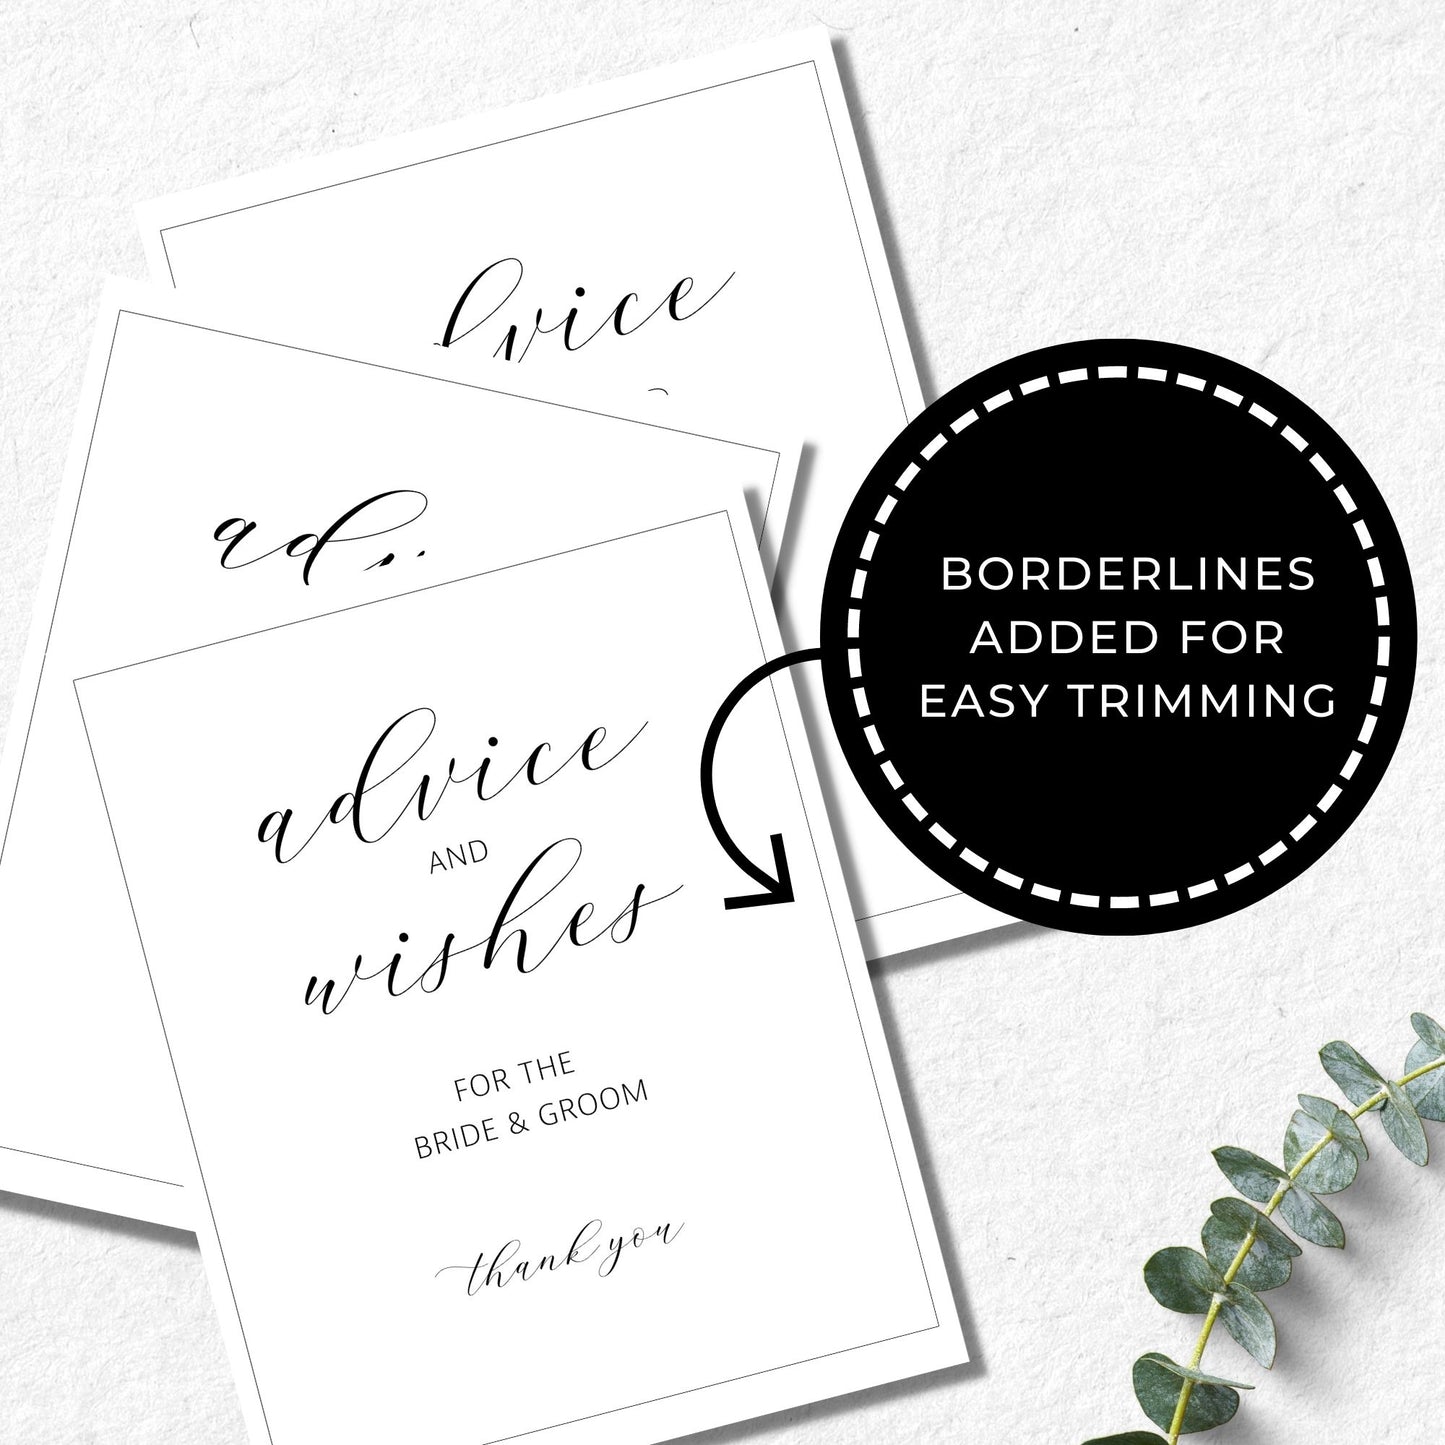 Wedding Advice and Wishes Sign for the Bride and Groom Printable